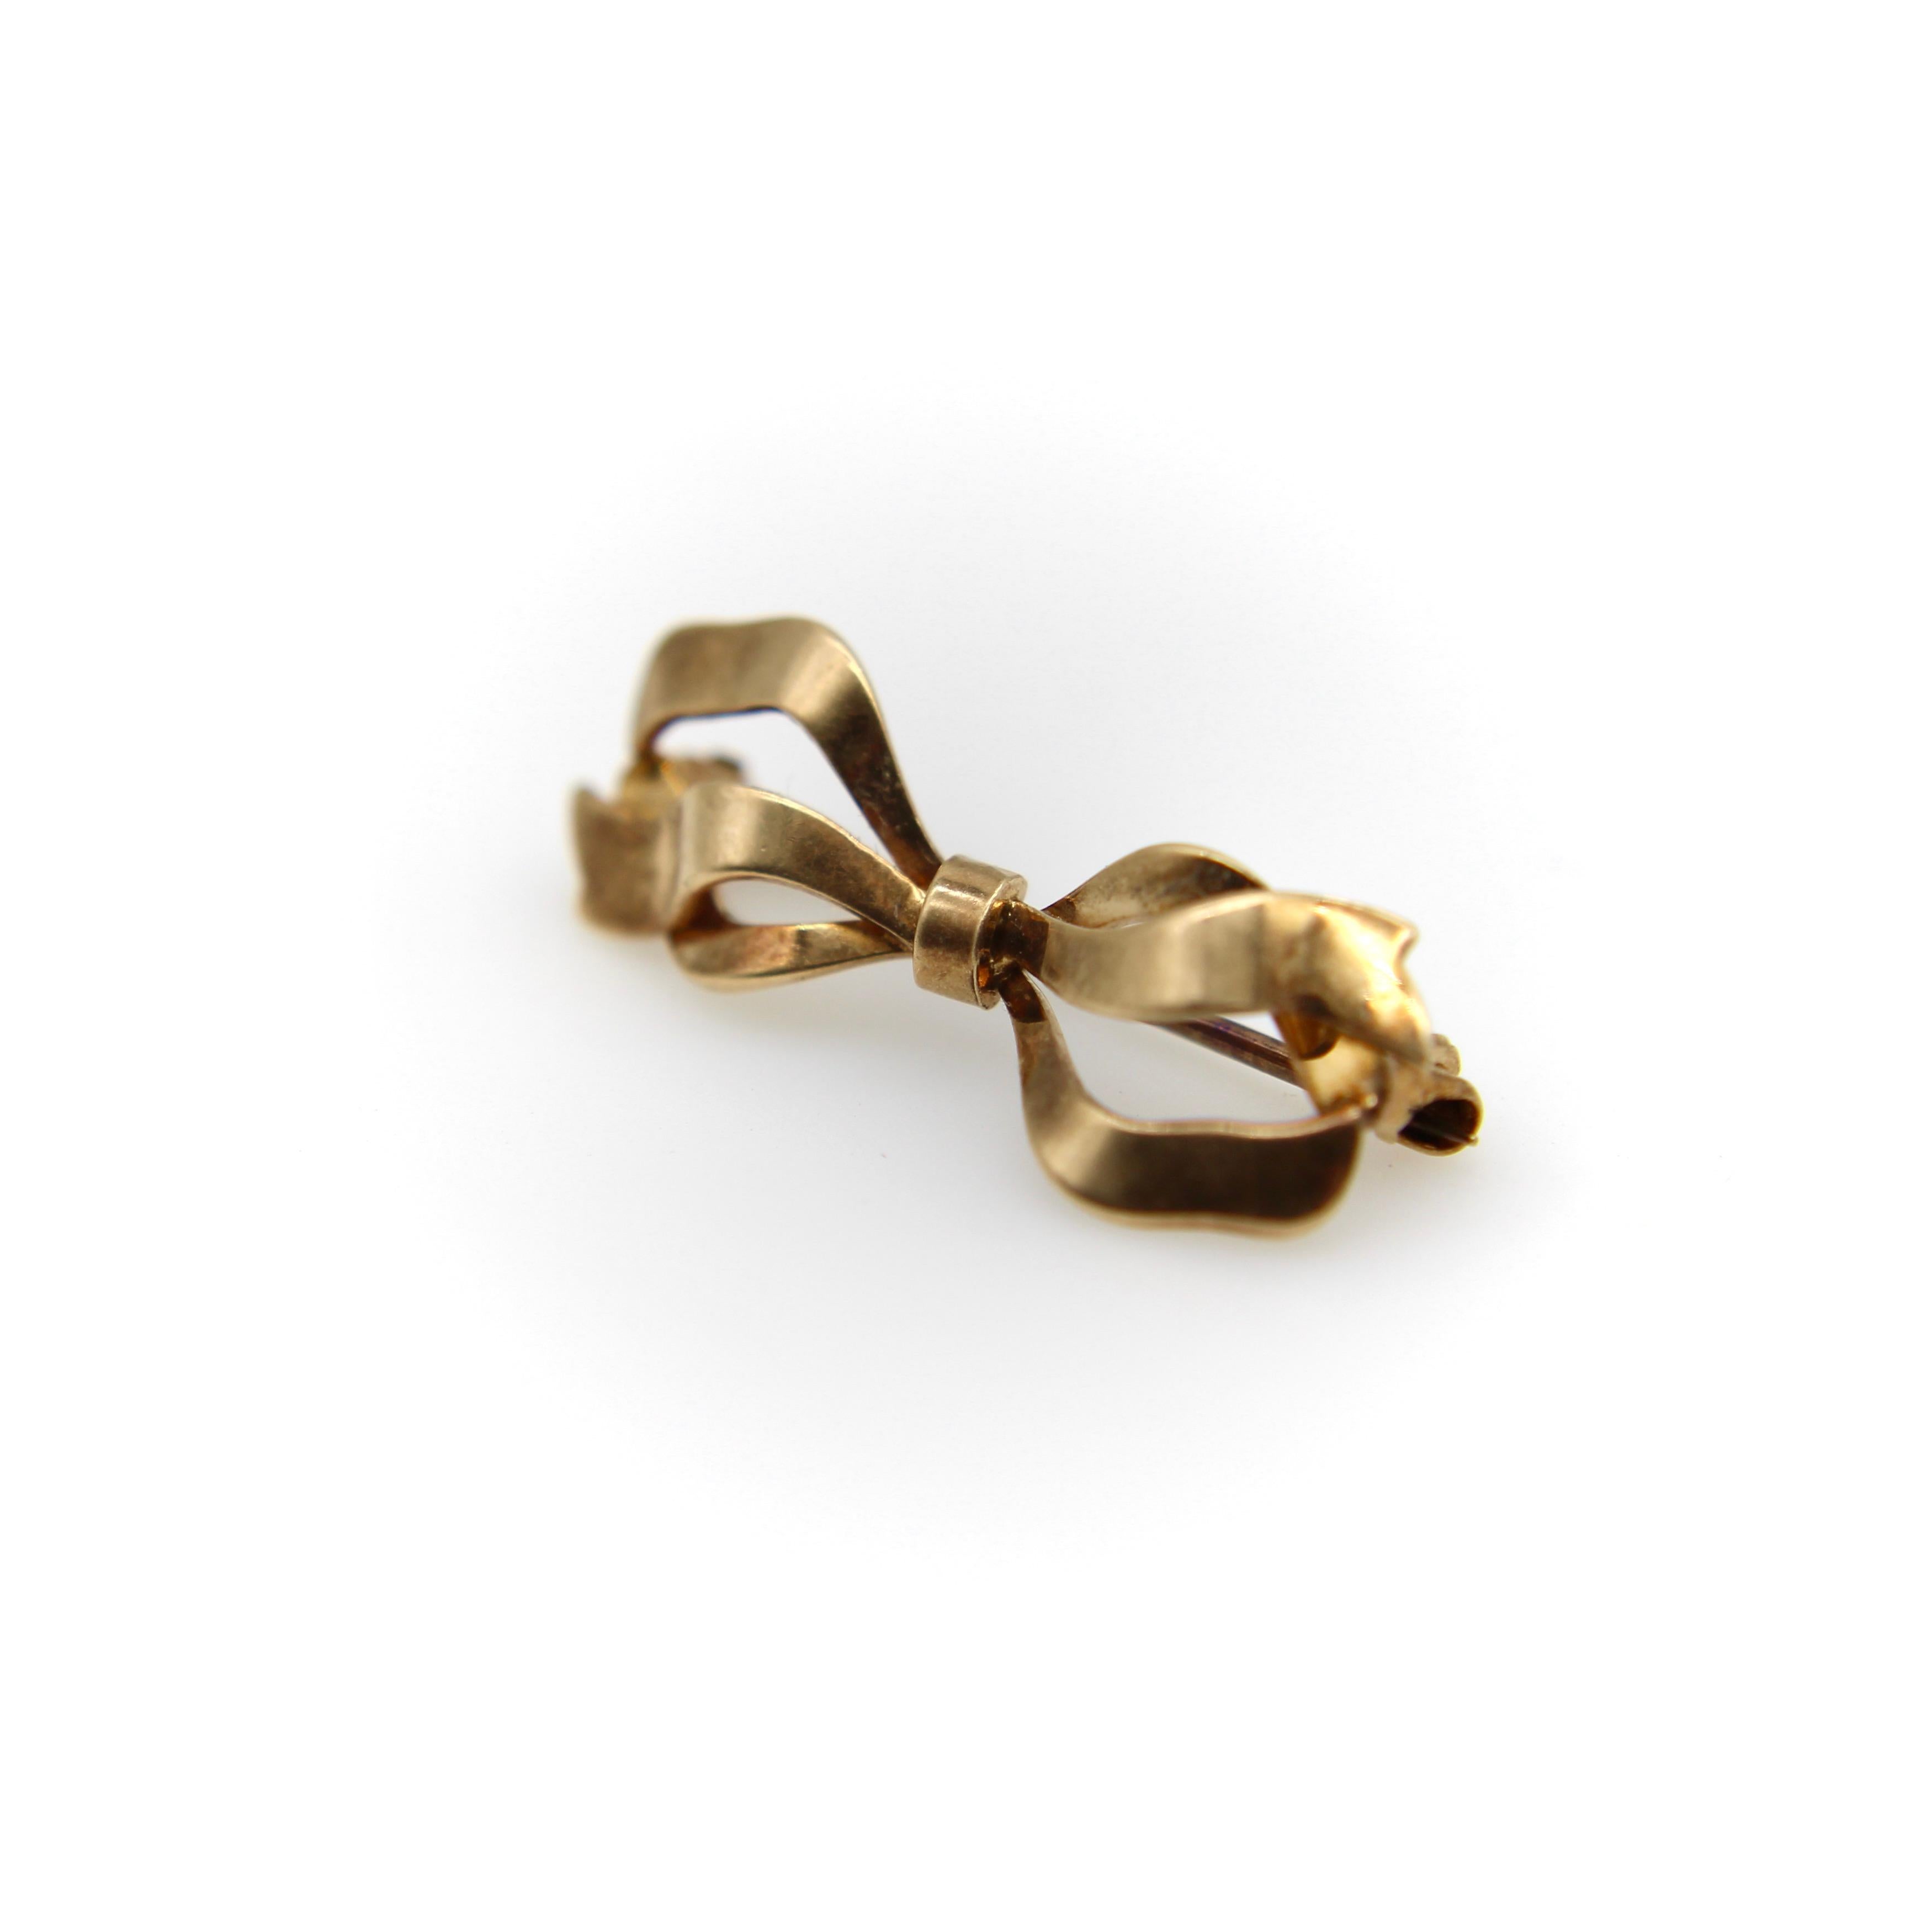 Circa the Victorian era, this 14k gold brooch is a tiny adorable little bow. The bow is lyrical, like a flowing ribbon you’d wear in your hair, and has a wonderful patina that adds to its charm. For its tiny size, the brooch has lots of details,